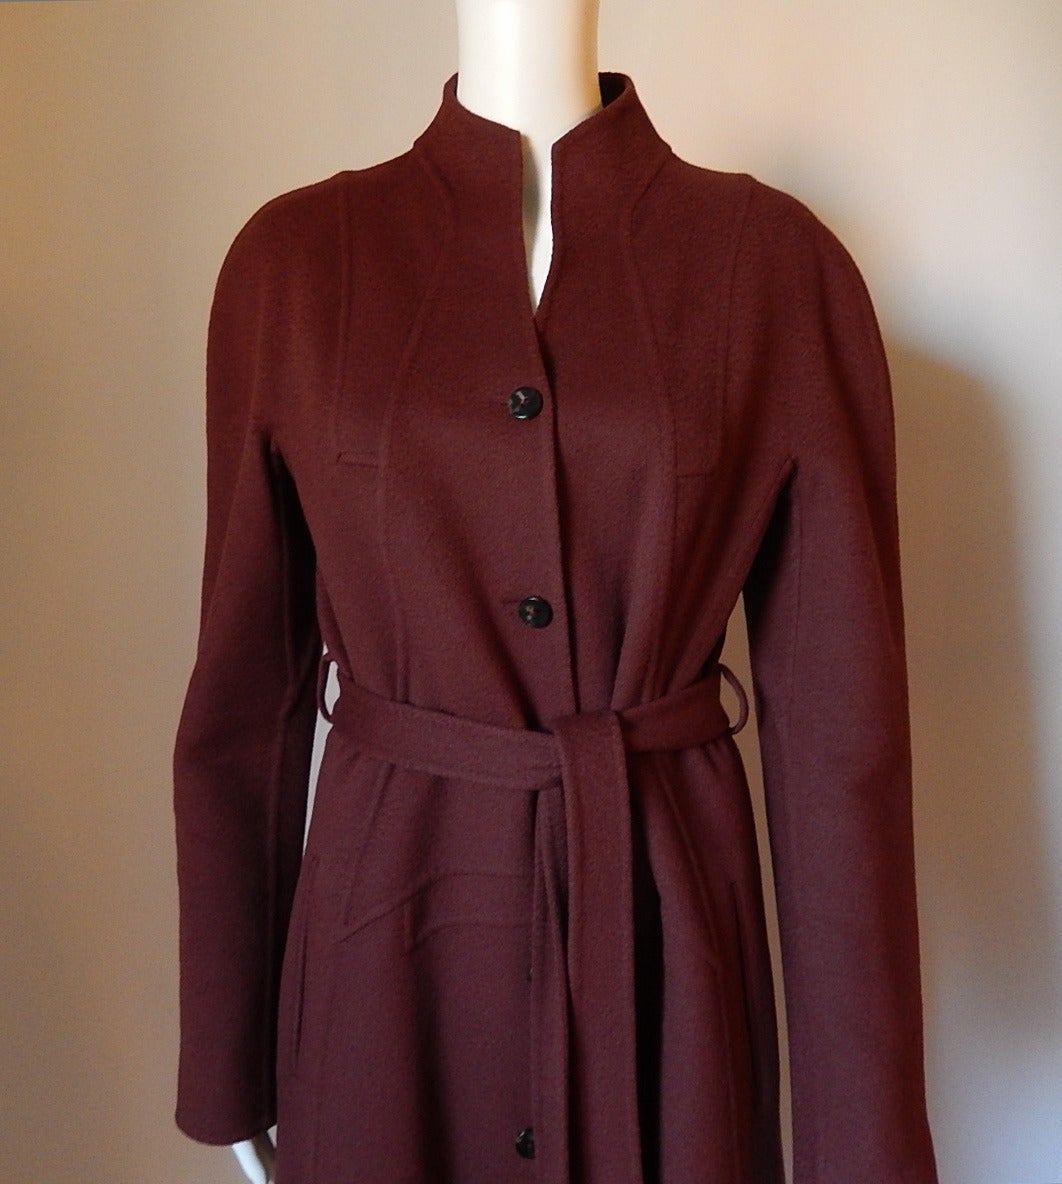 Chado Ralph Rucci double faced cashmere coat
Buttons down the front
Side slit pockets
All hand sewn with his seaming details and stitching details
Belt included
Color is Maroon
Bust:  39